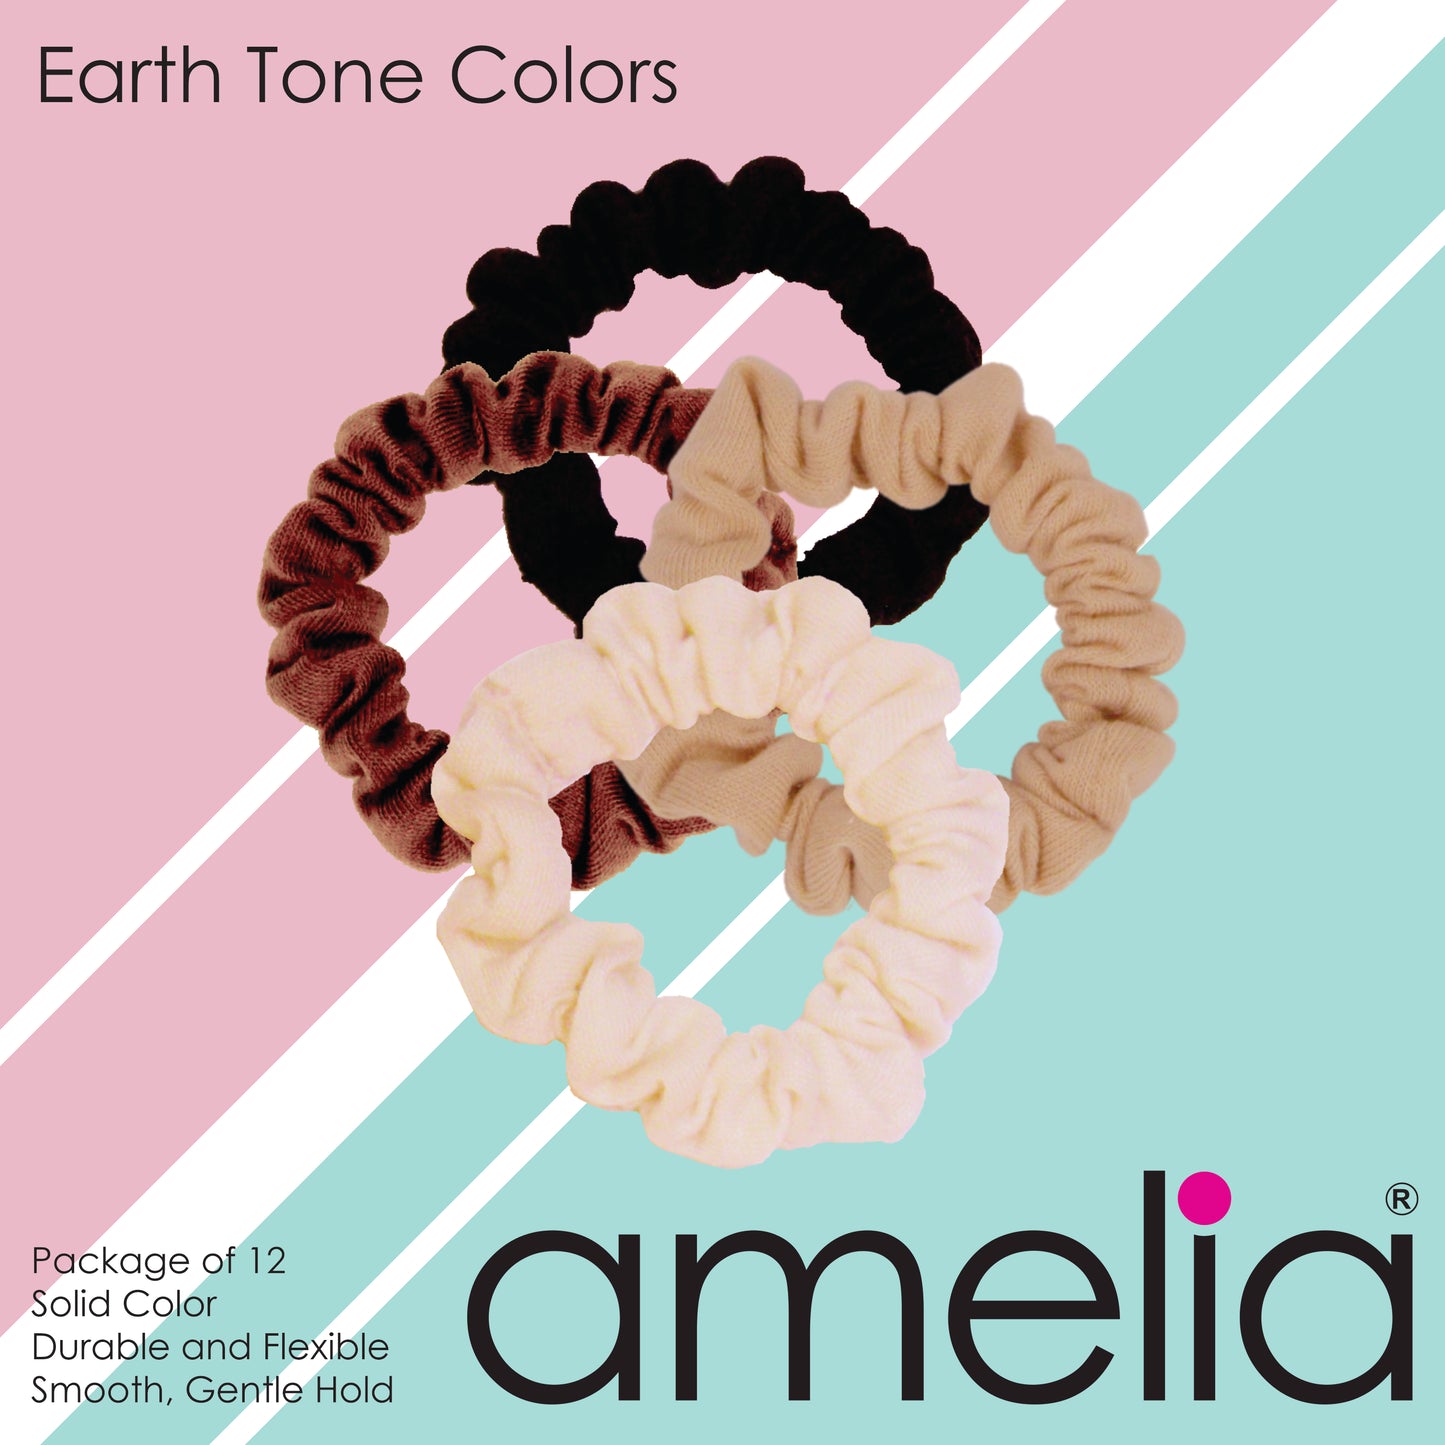 Amelia Beauty, Earth Mix Jersey Scrunchies, 2.25in Diameter, Gentle on Hair, Strong Hold, No Snag, No Dents or Creases. 12 Pack